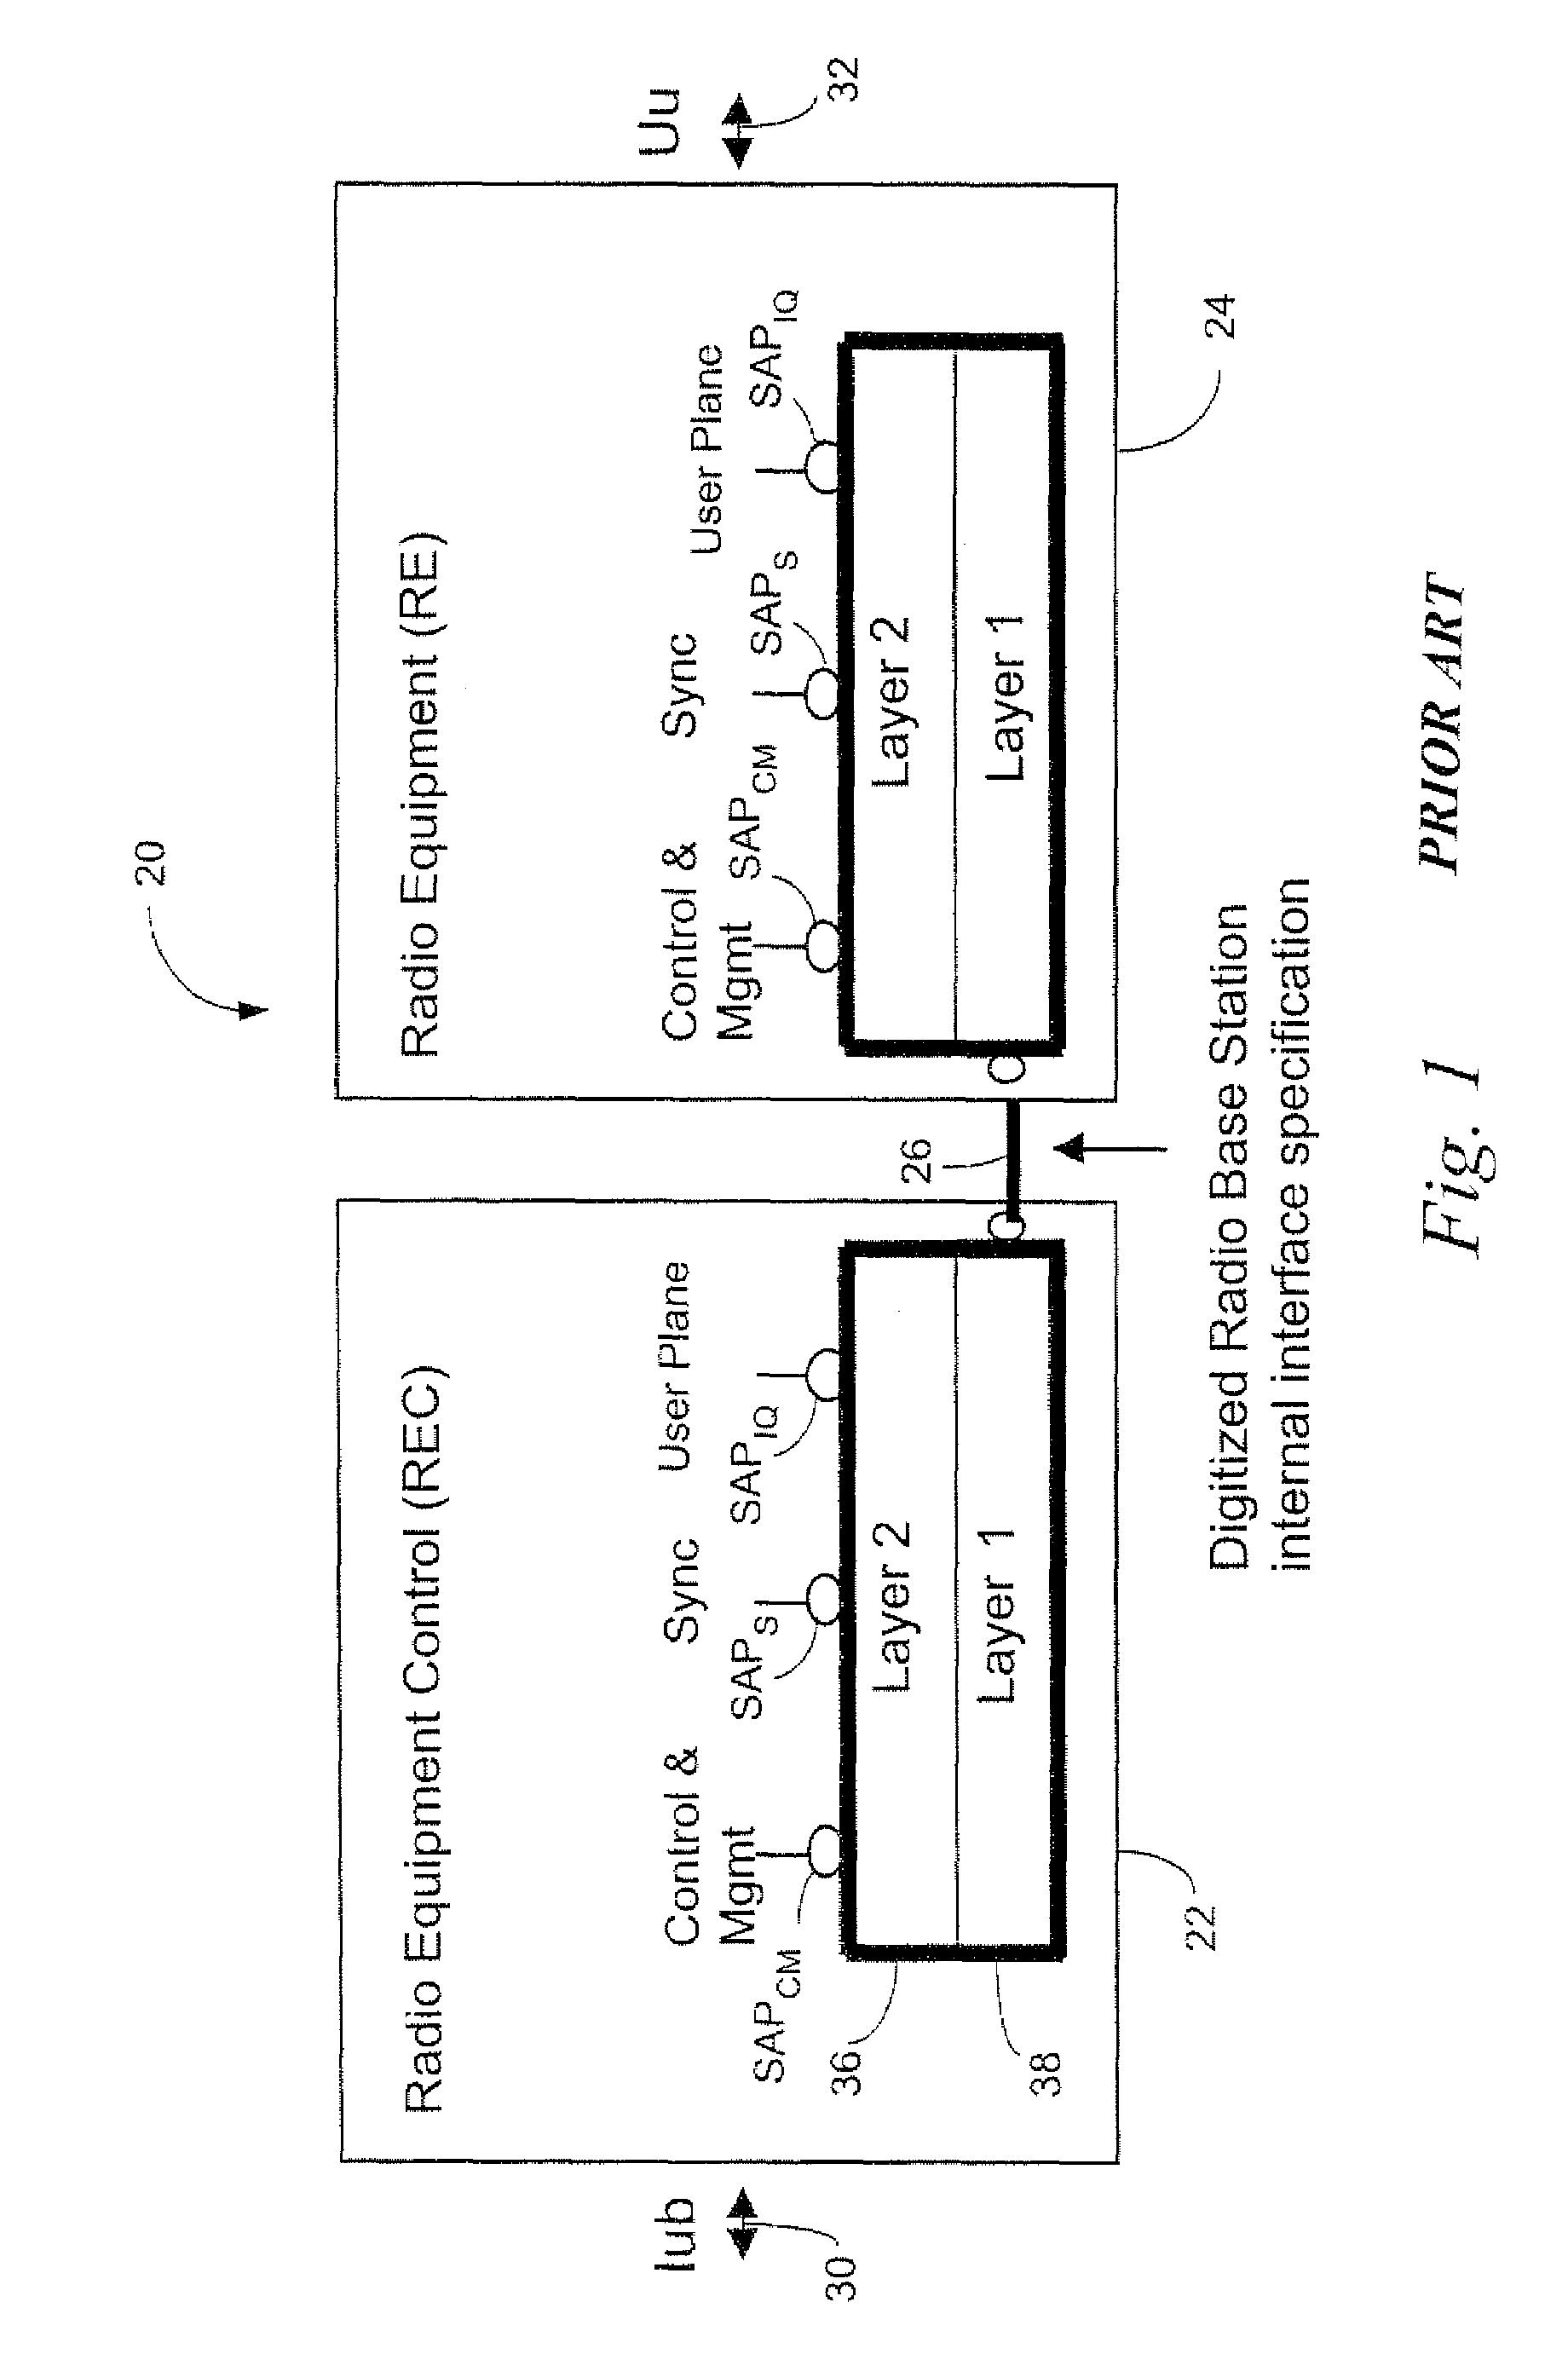 Encapsulation of independent transmissions over internal interface of distributed radio base station